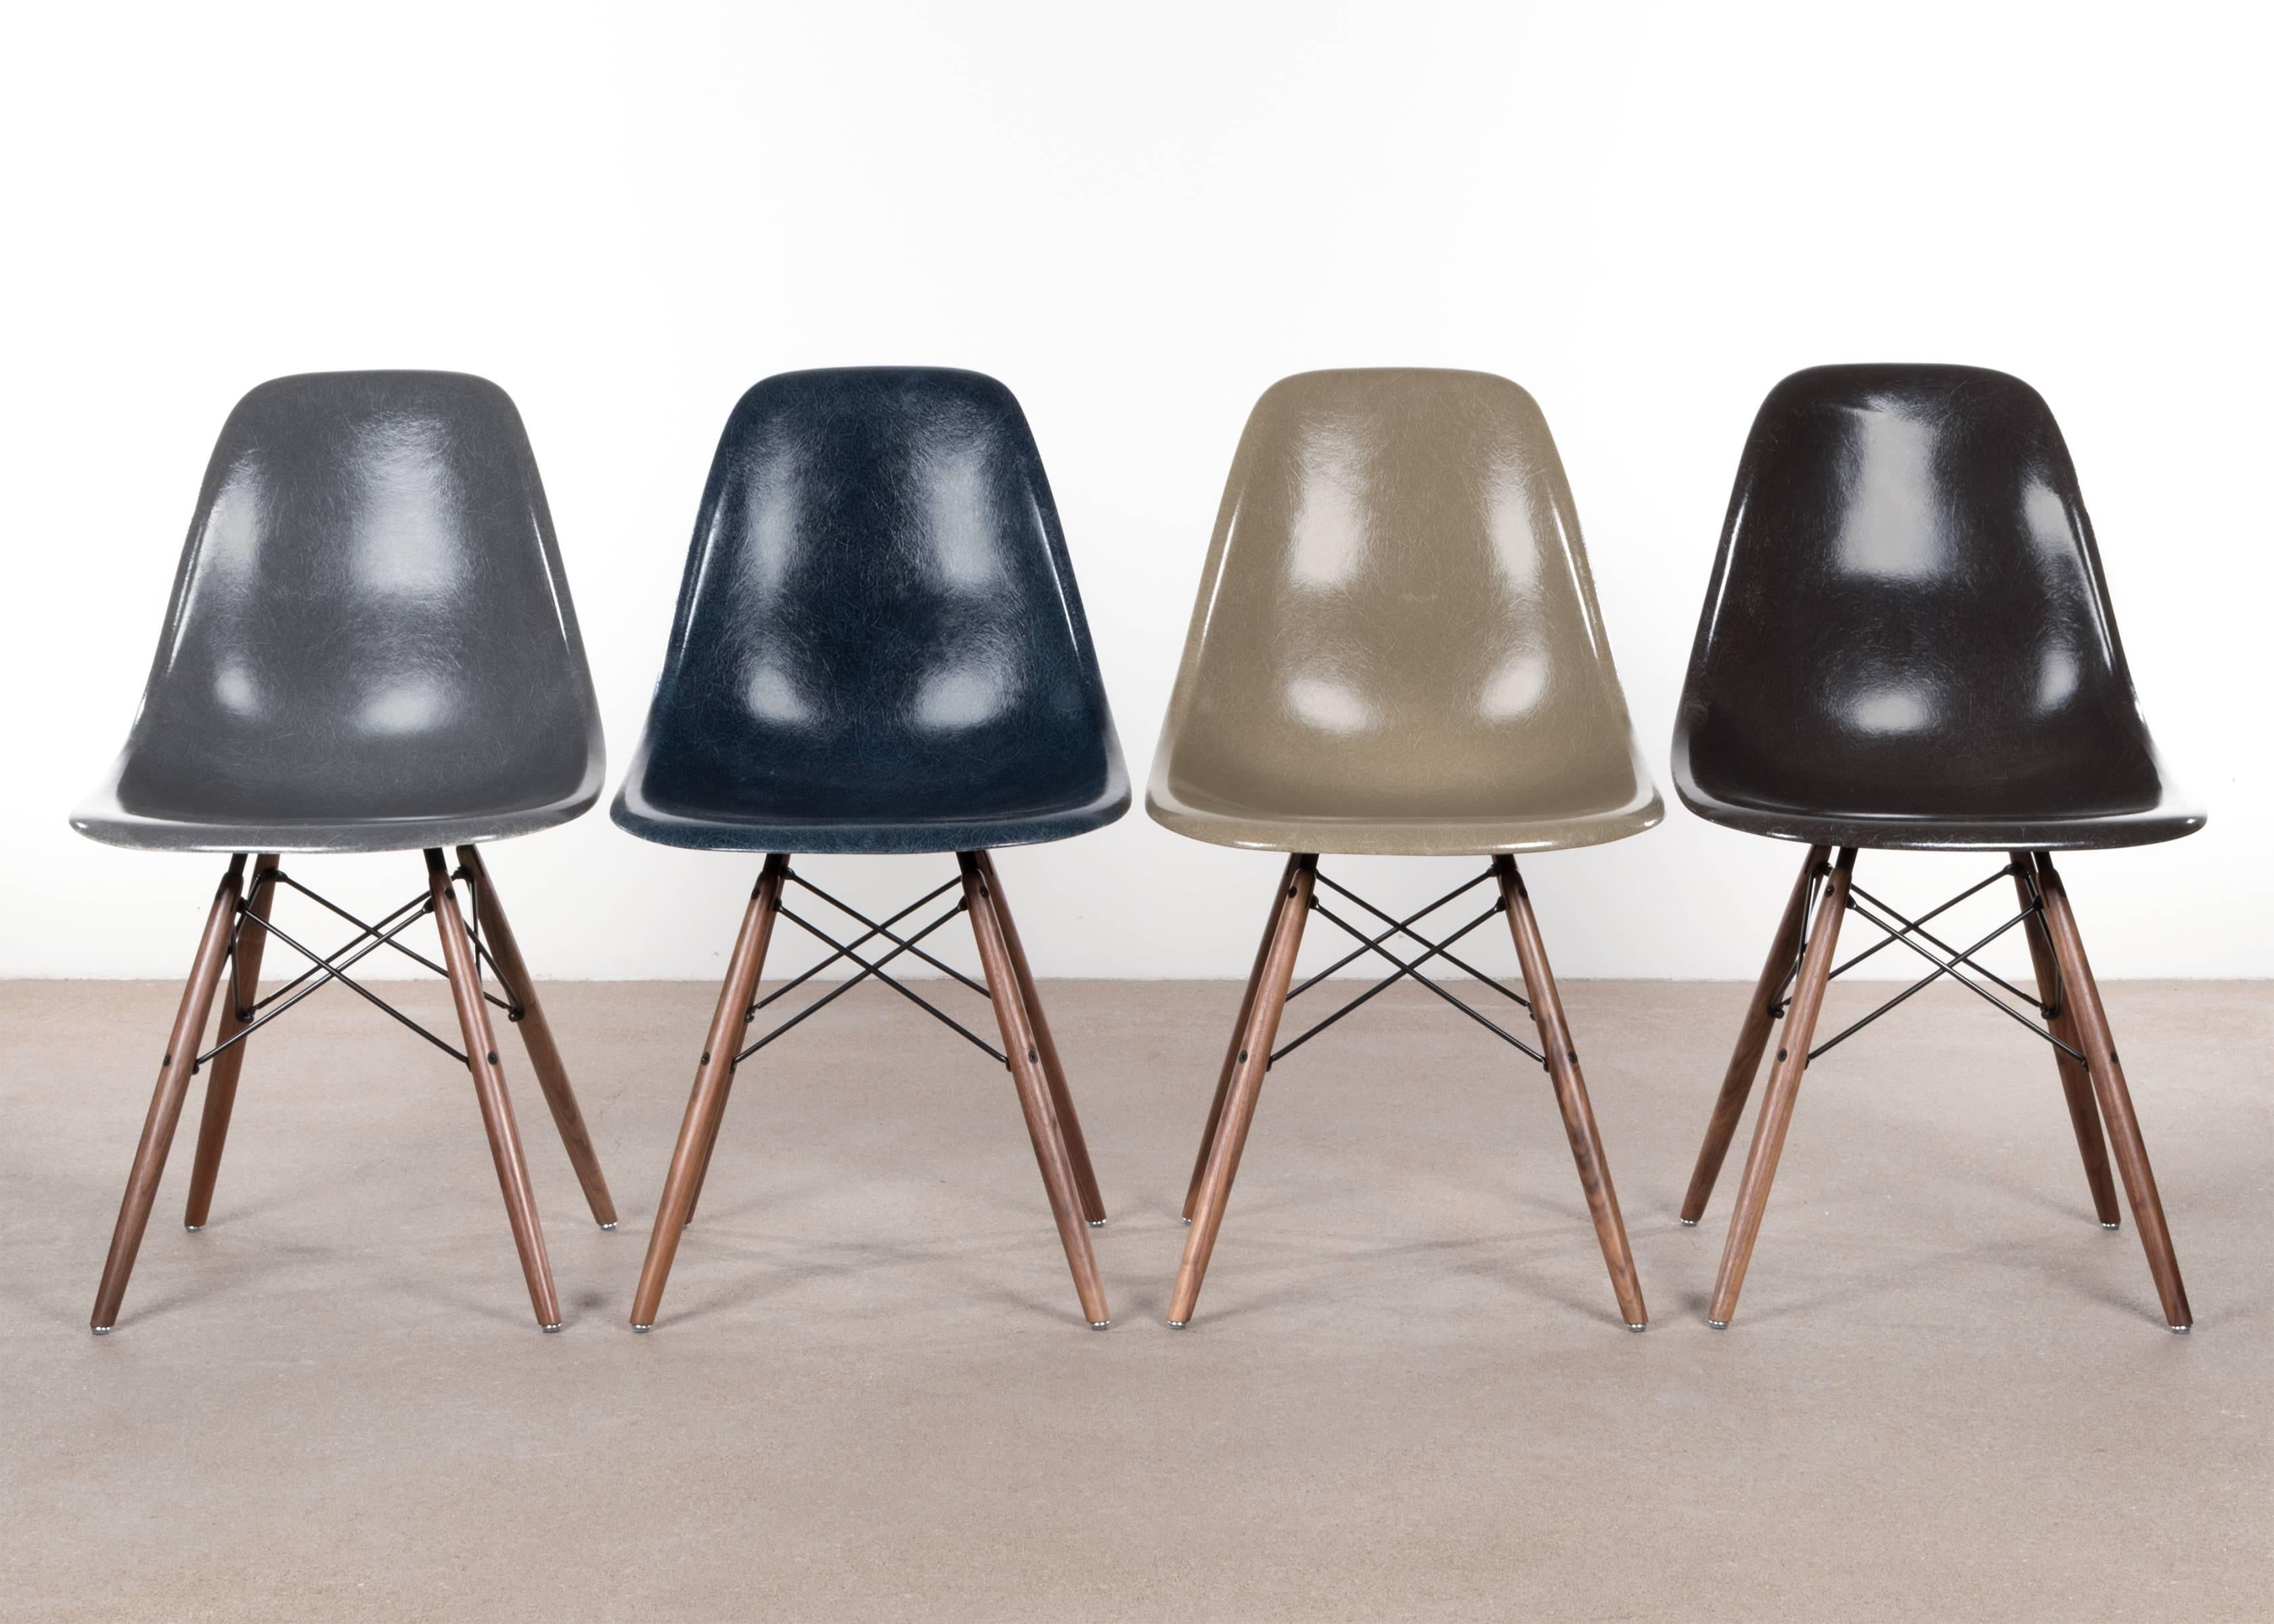 Beautiful iconic DSW chairs in natural colors: elephant hide, navy blue, raw umber and charcoal.
Shells are in very good or excellent condition with only slight traces of use. Replaced shock mounts which guarantee save usability for the next